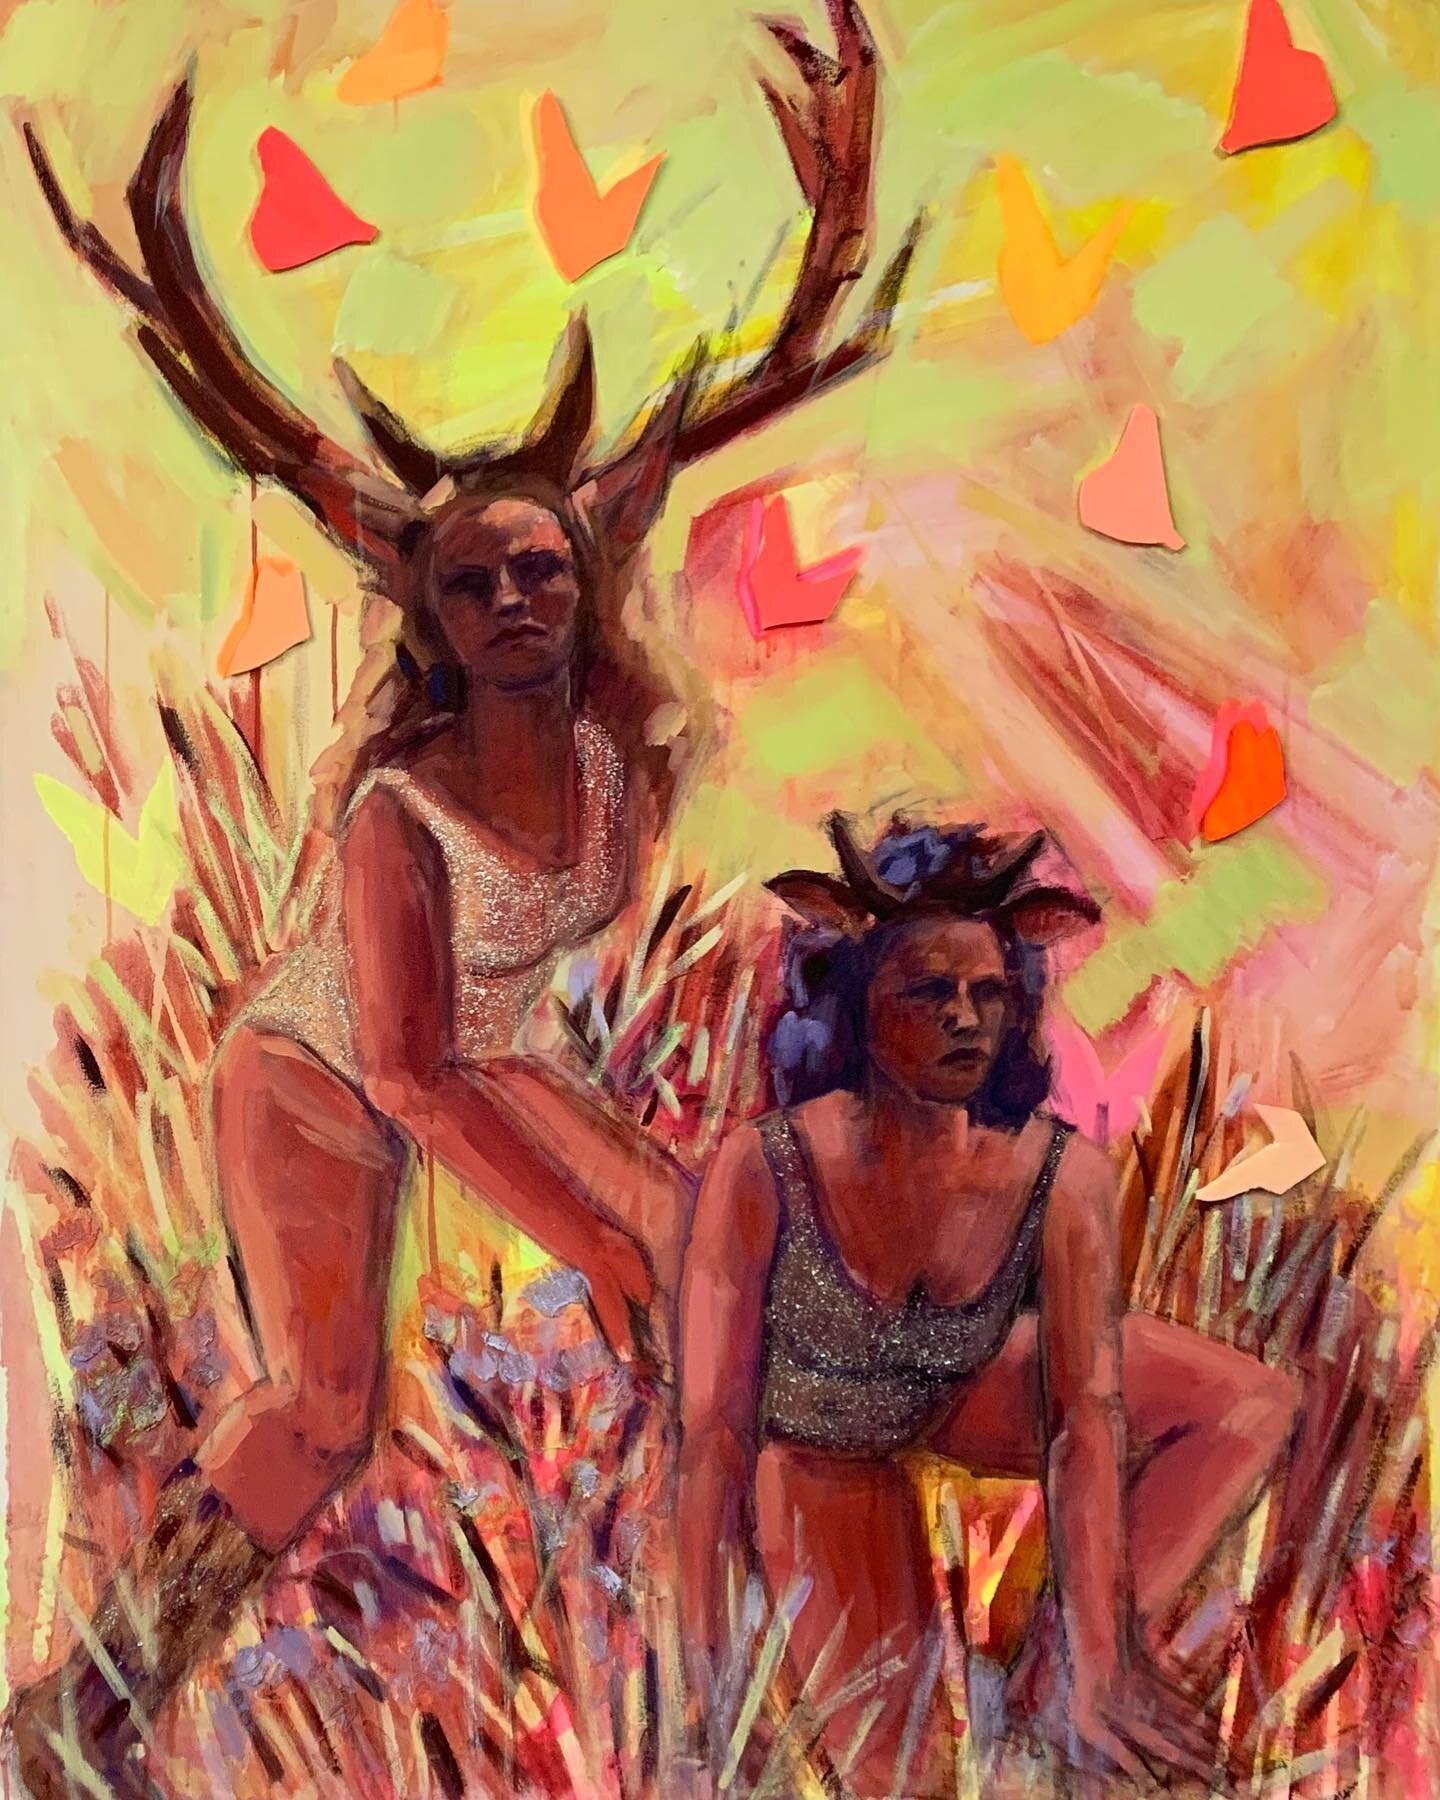 Oh, so you say it&rsquo;s woman&rsquo;s day&hellip; #elkwomen #fullmoon #painting #laart #laartist #internationalwomensday